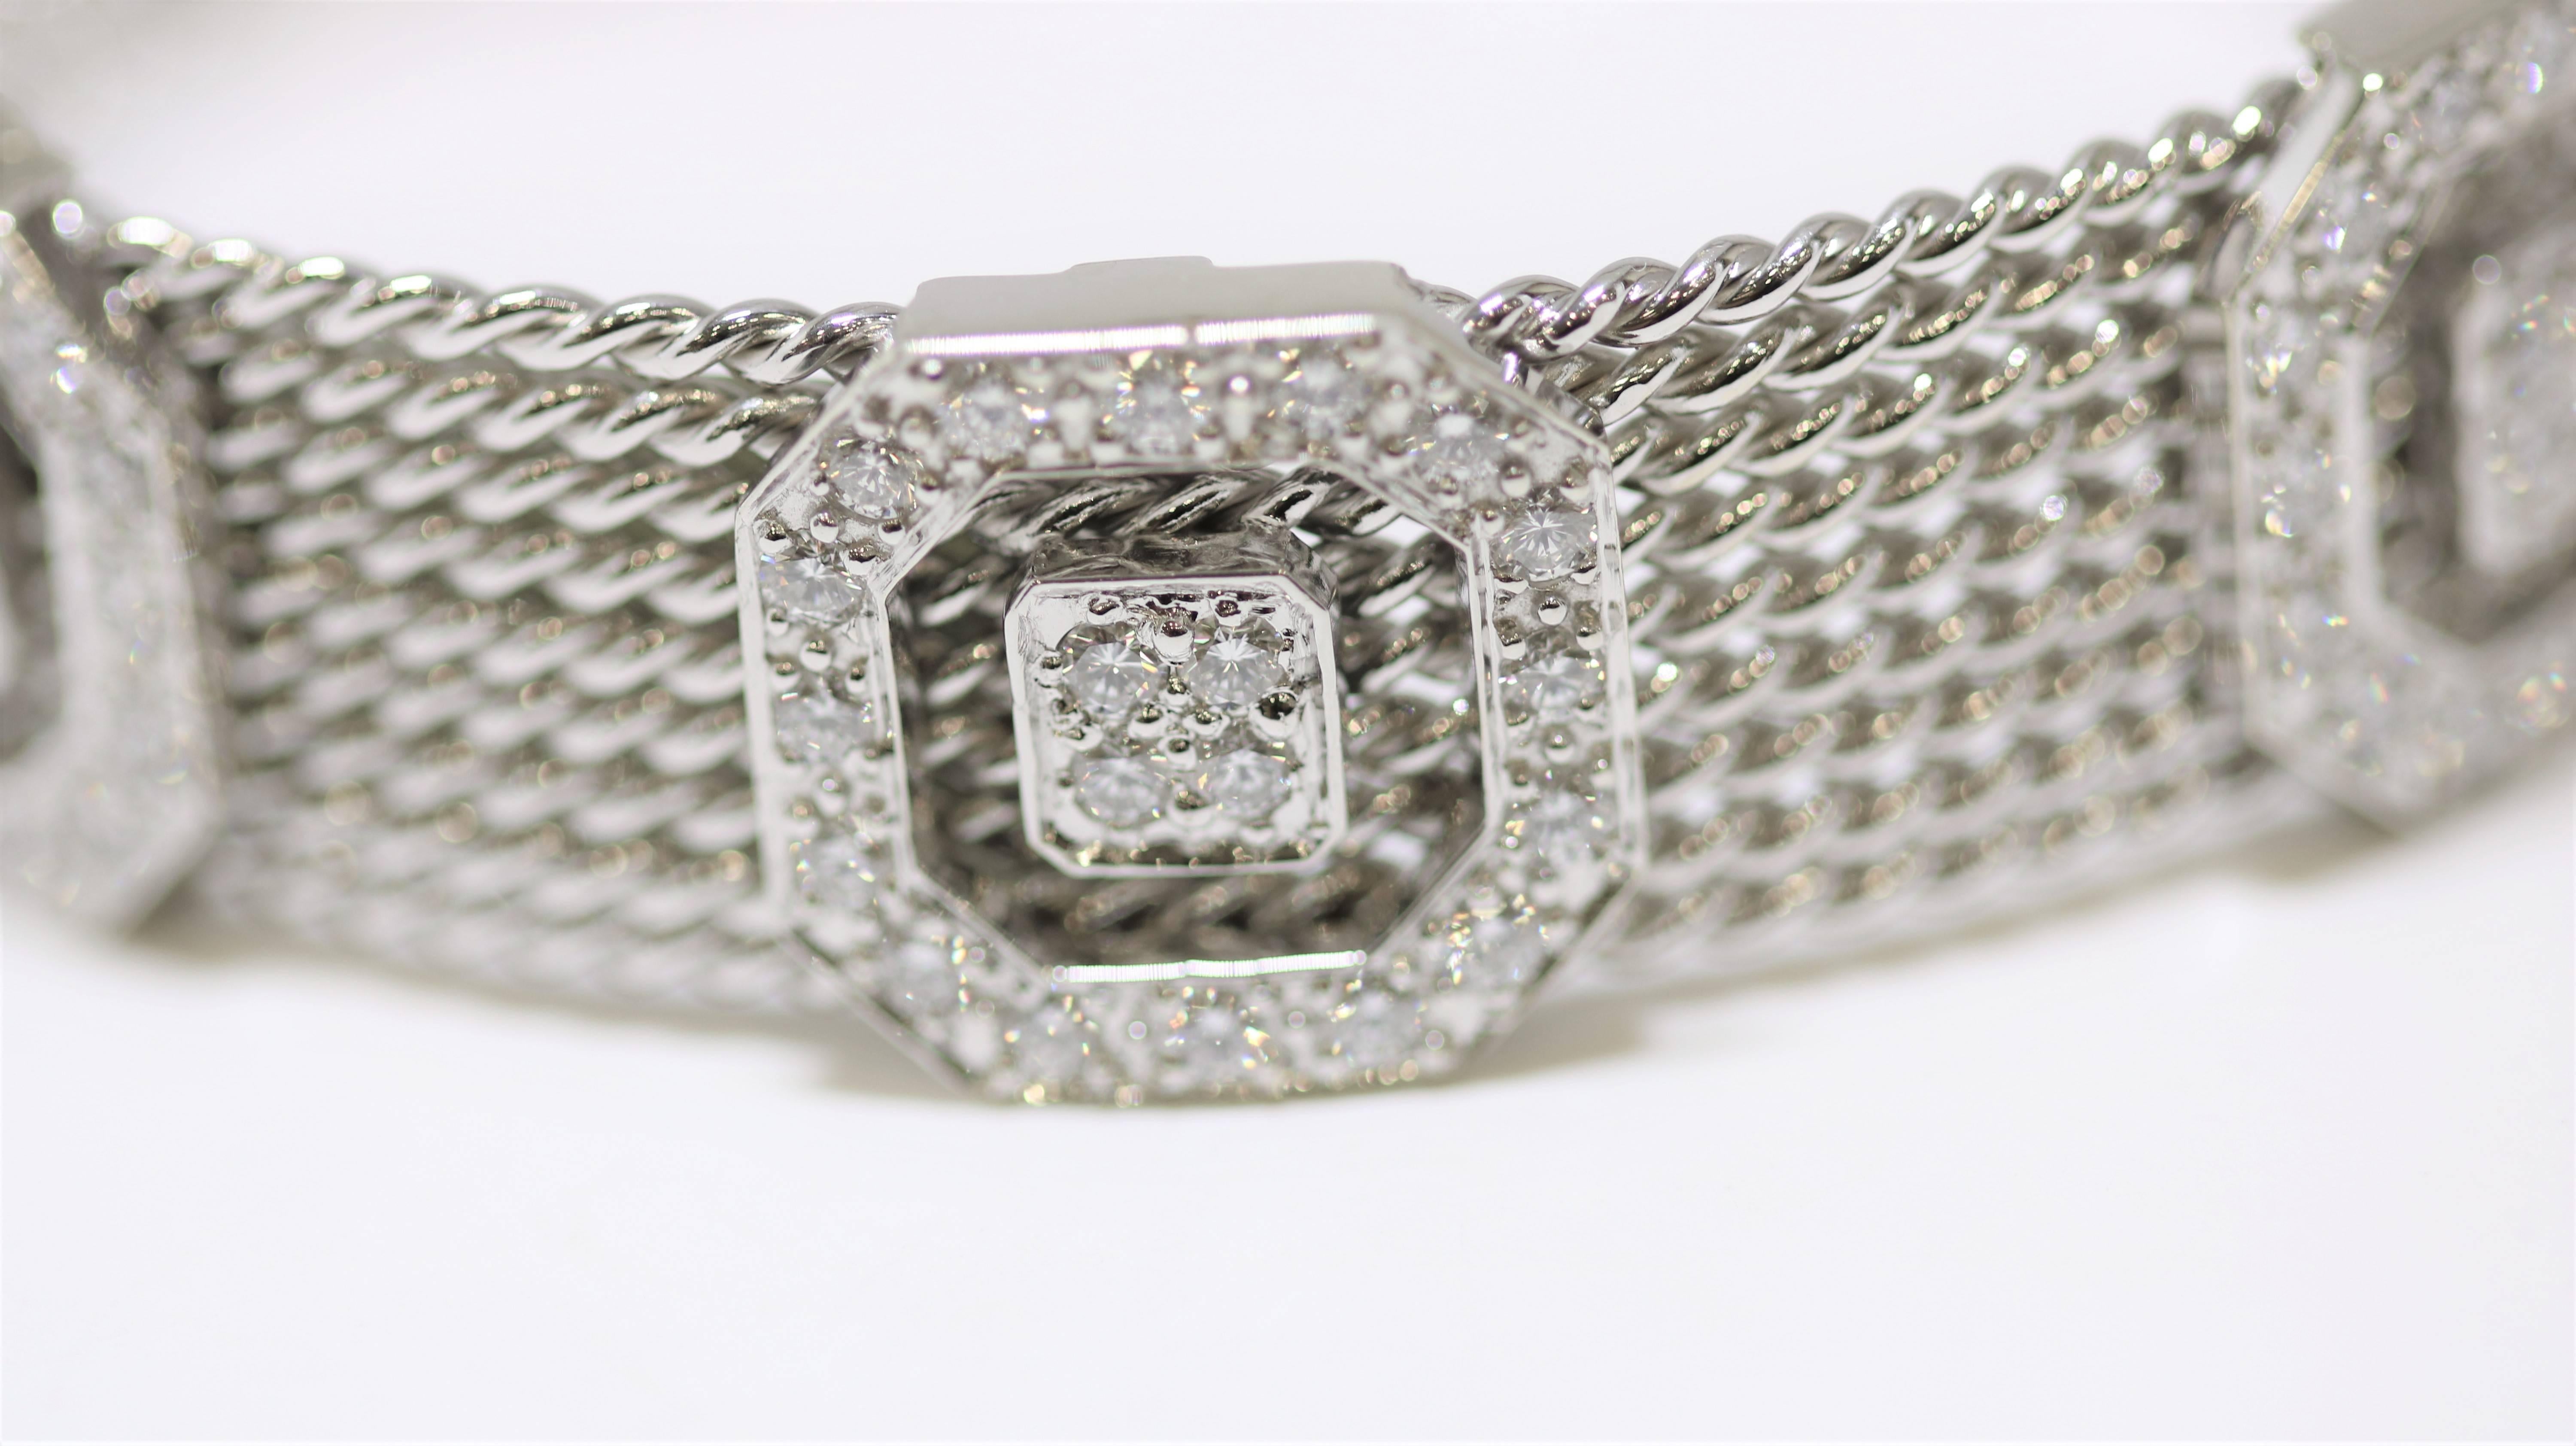 This multi strand bangle is made of14k white gold with 3 square diamond sections; slightly flexible; 60 diamonds weighing 2.85 ct total weight.

